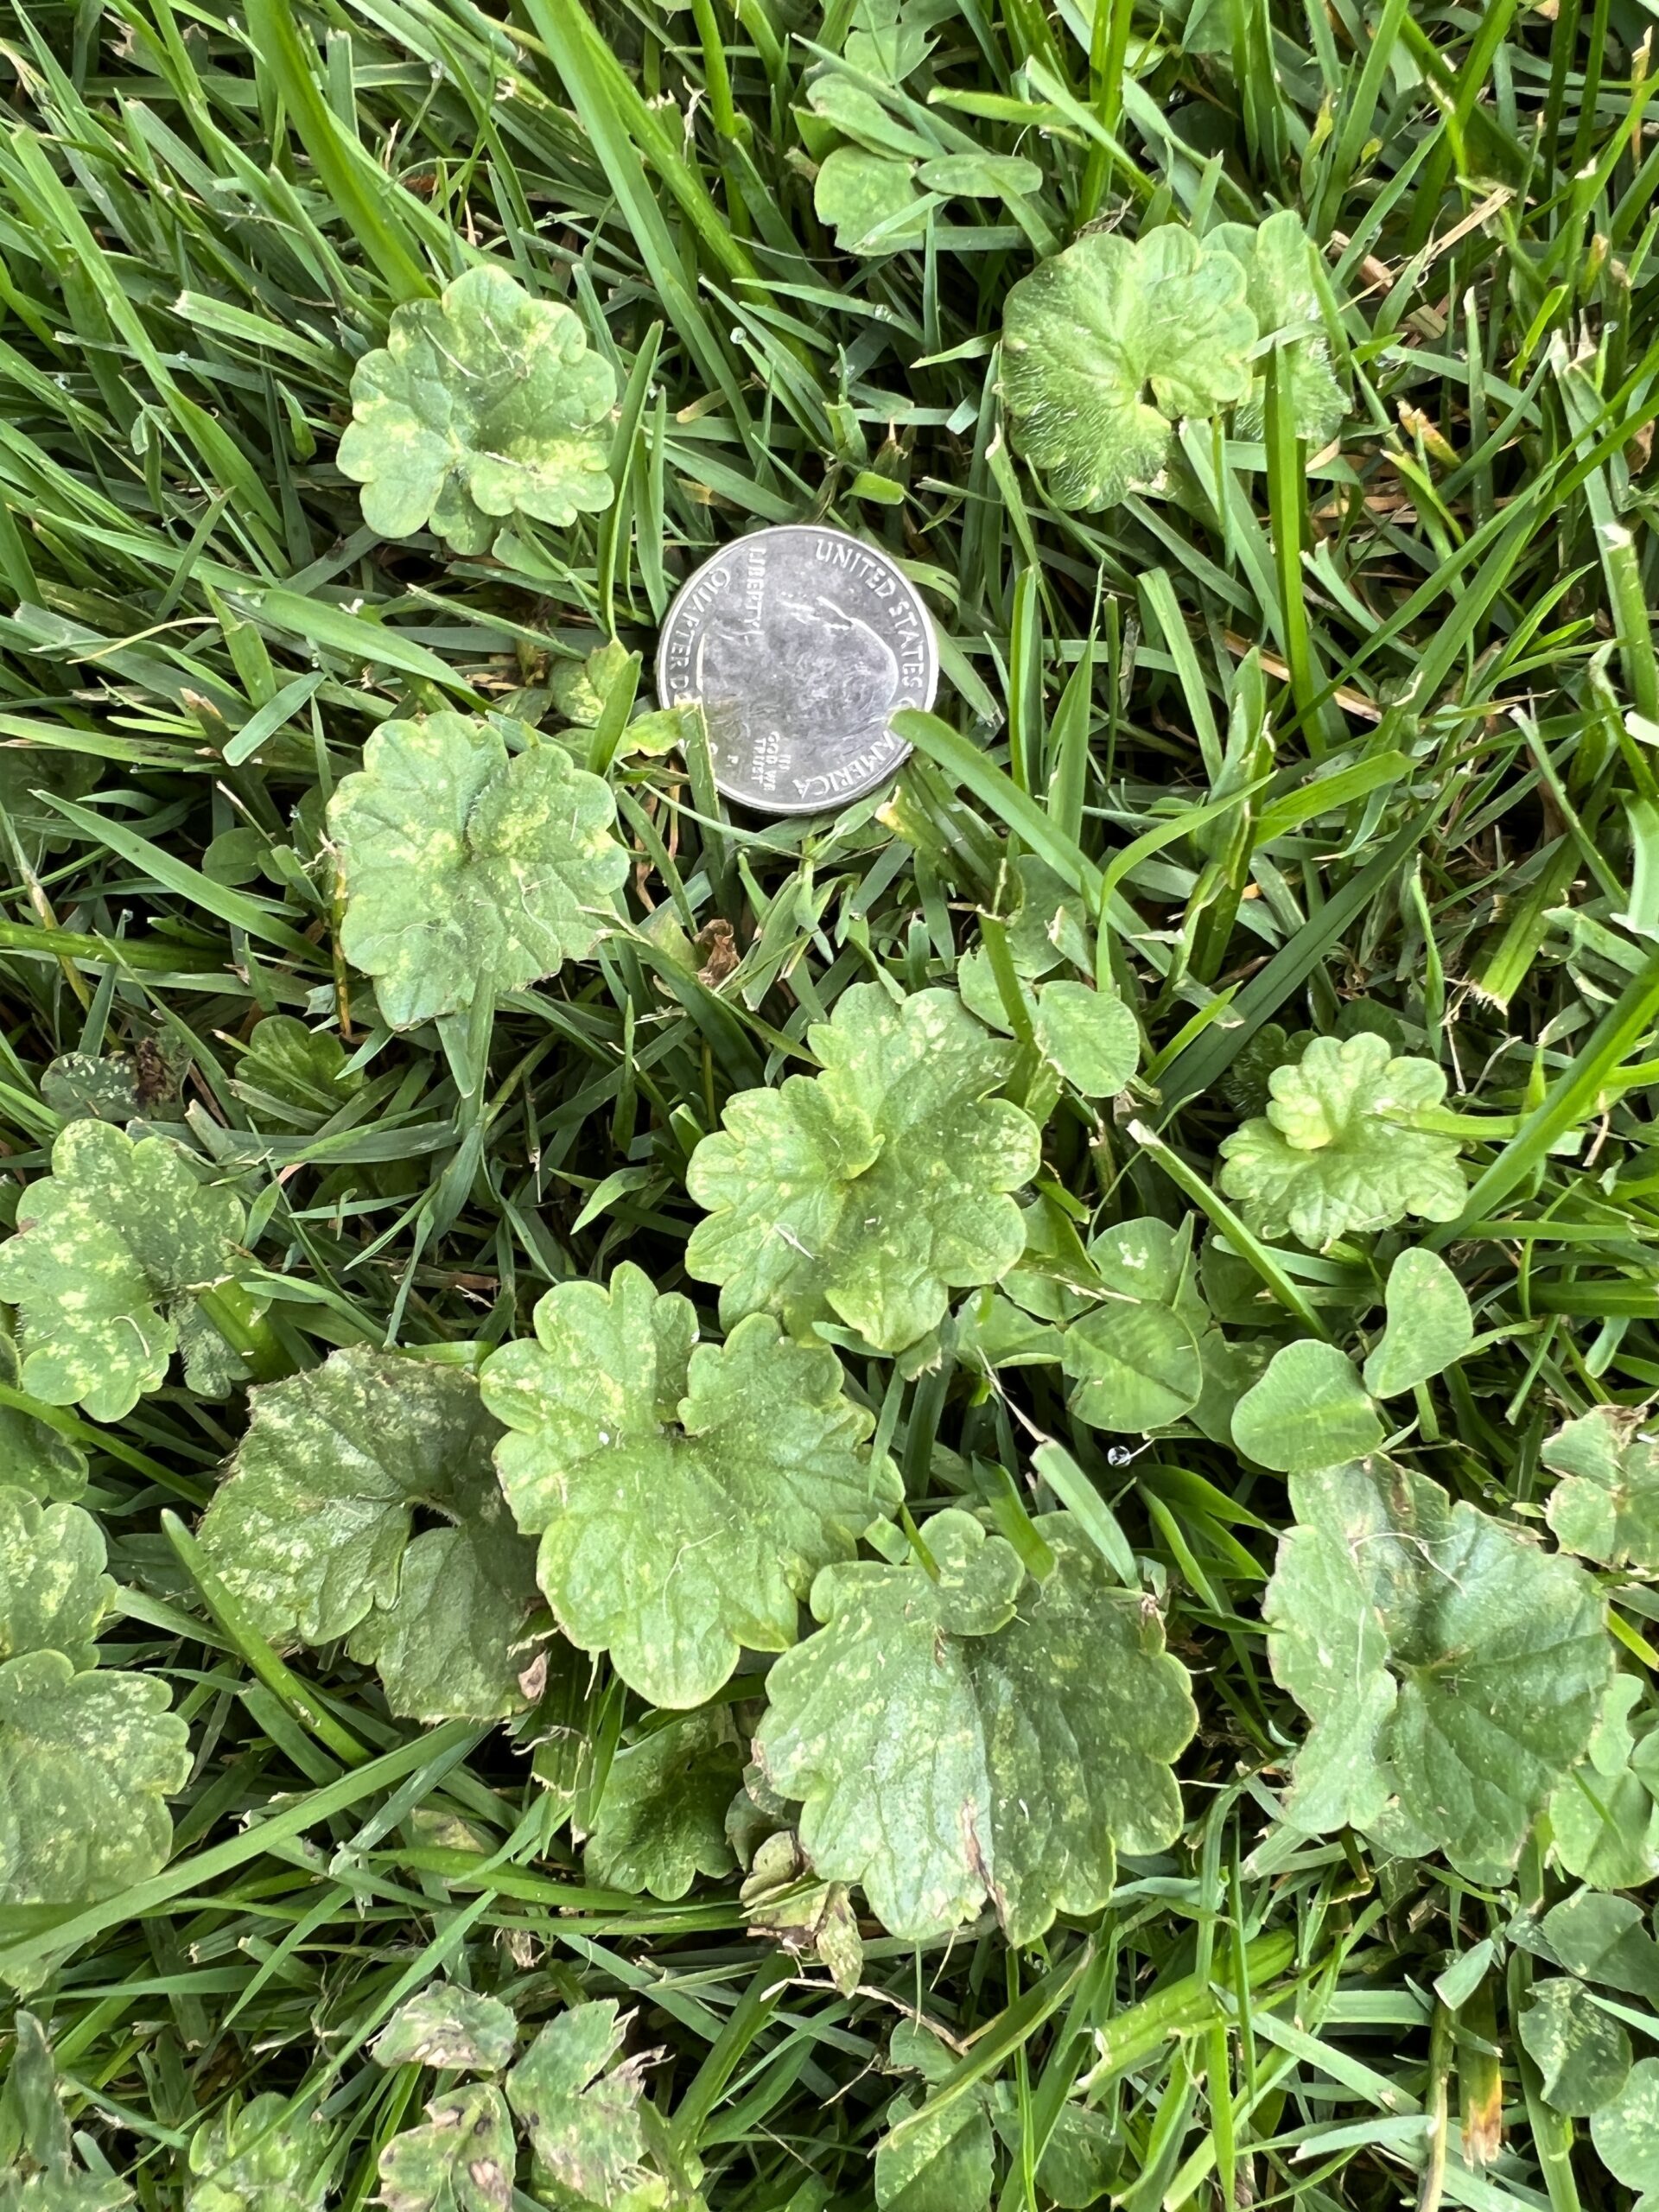 Ground ivy (Glechoma hederacea), also known as creeping Charlie, is a tenacious weed of lawns and gardens. After many years of attempted control with organics I switched to a chemical herbicide. In future years, only limited spot treatments should be needed.